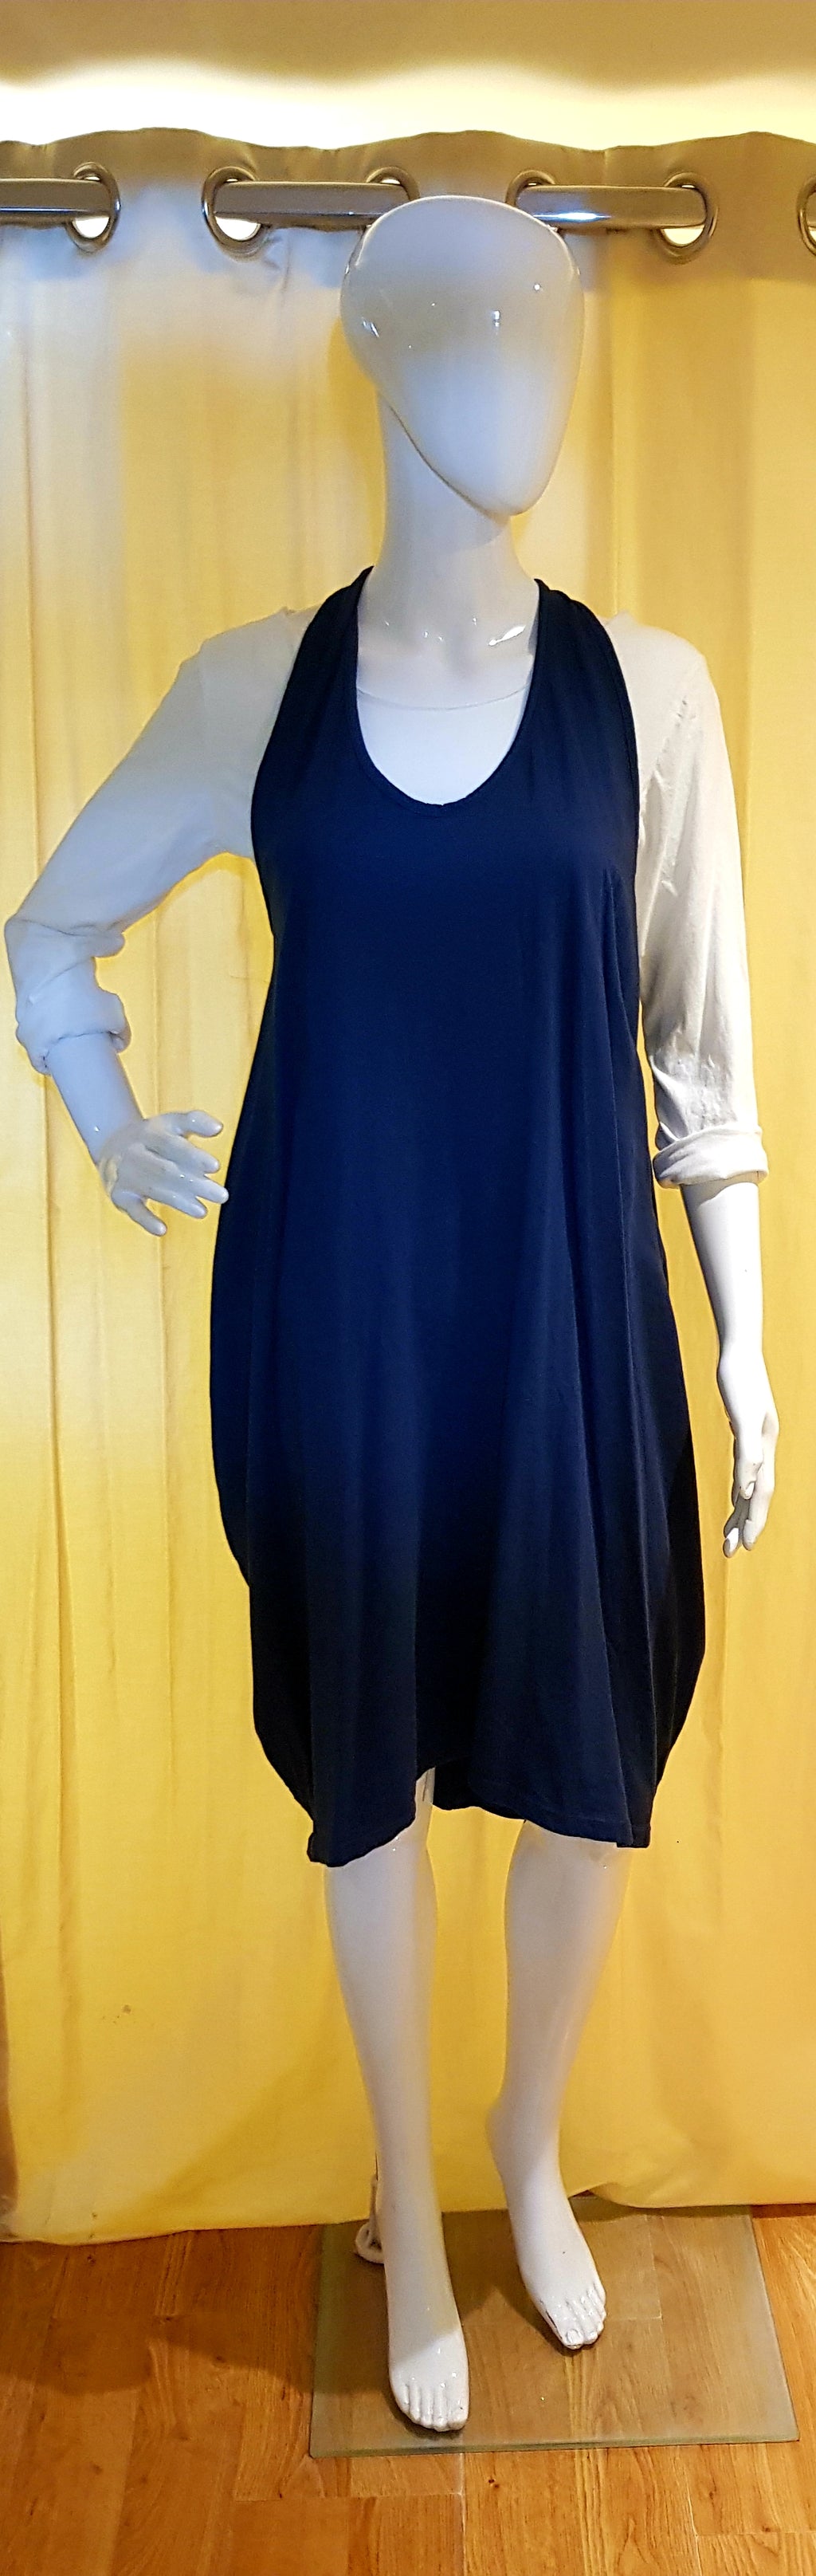 Made in Italy Top & Dress Navy